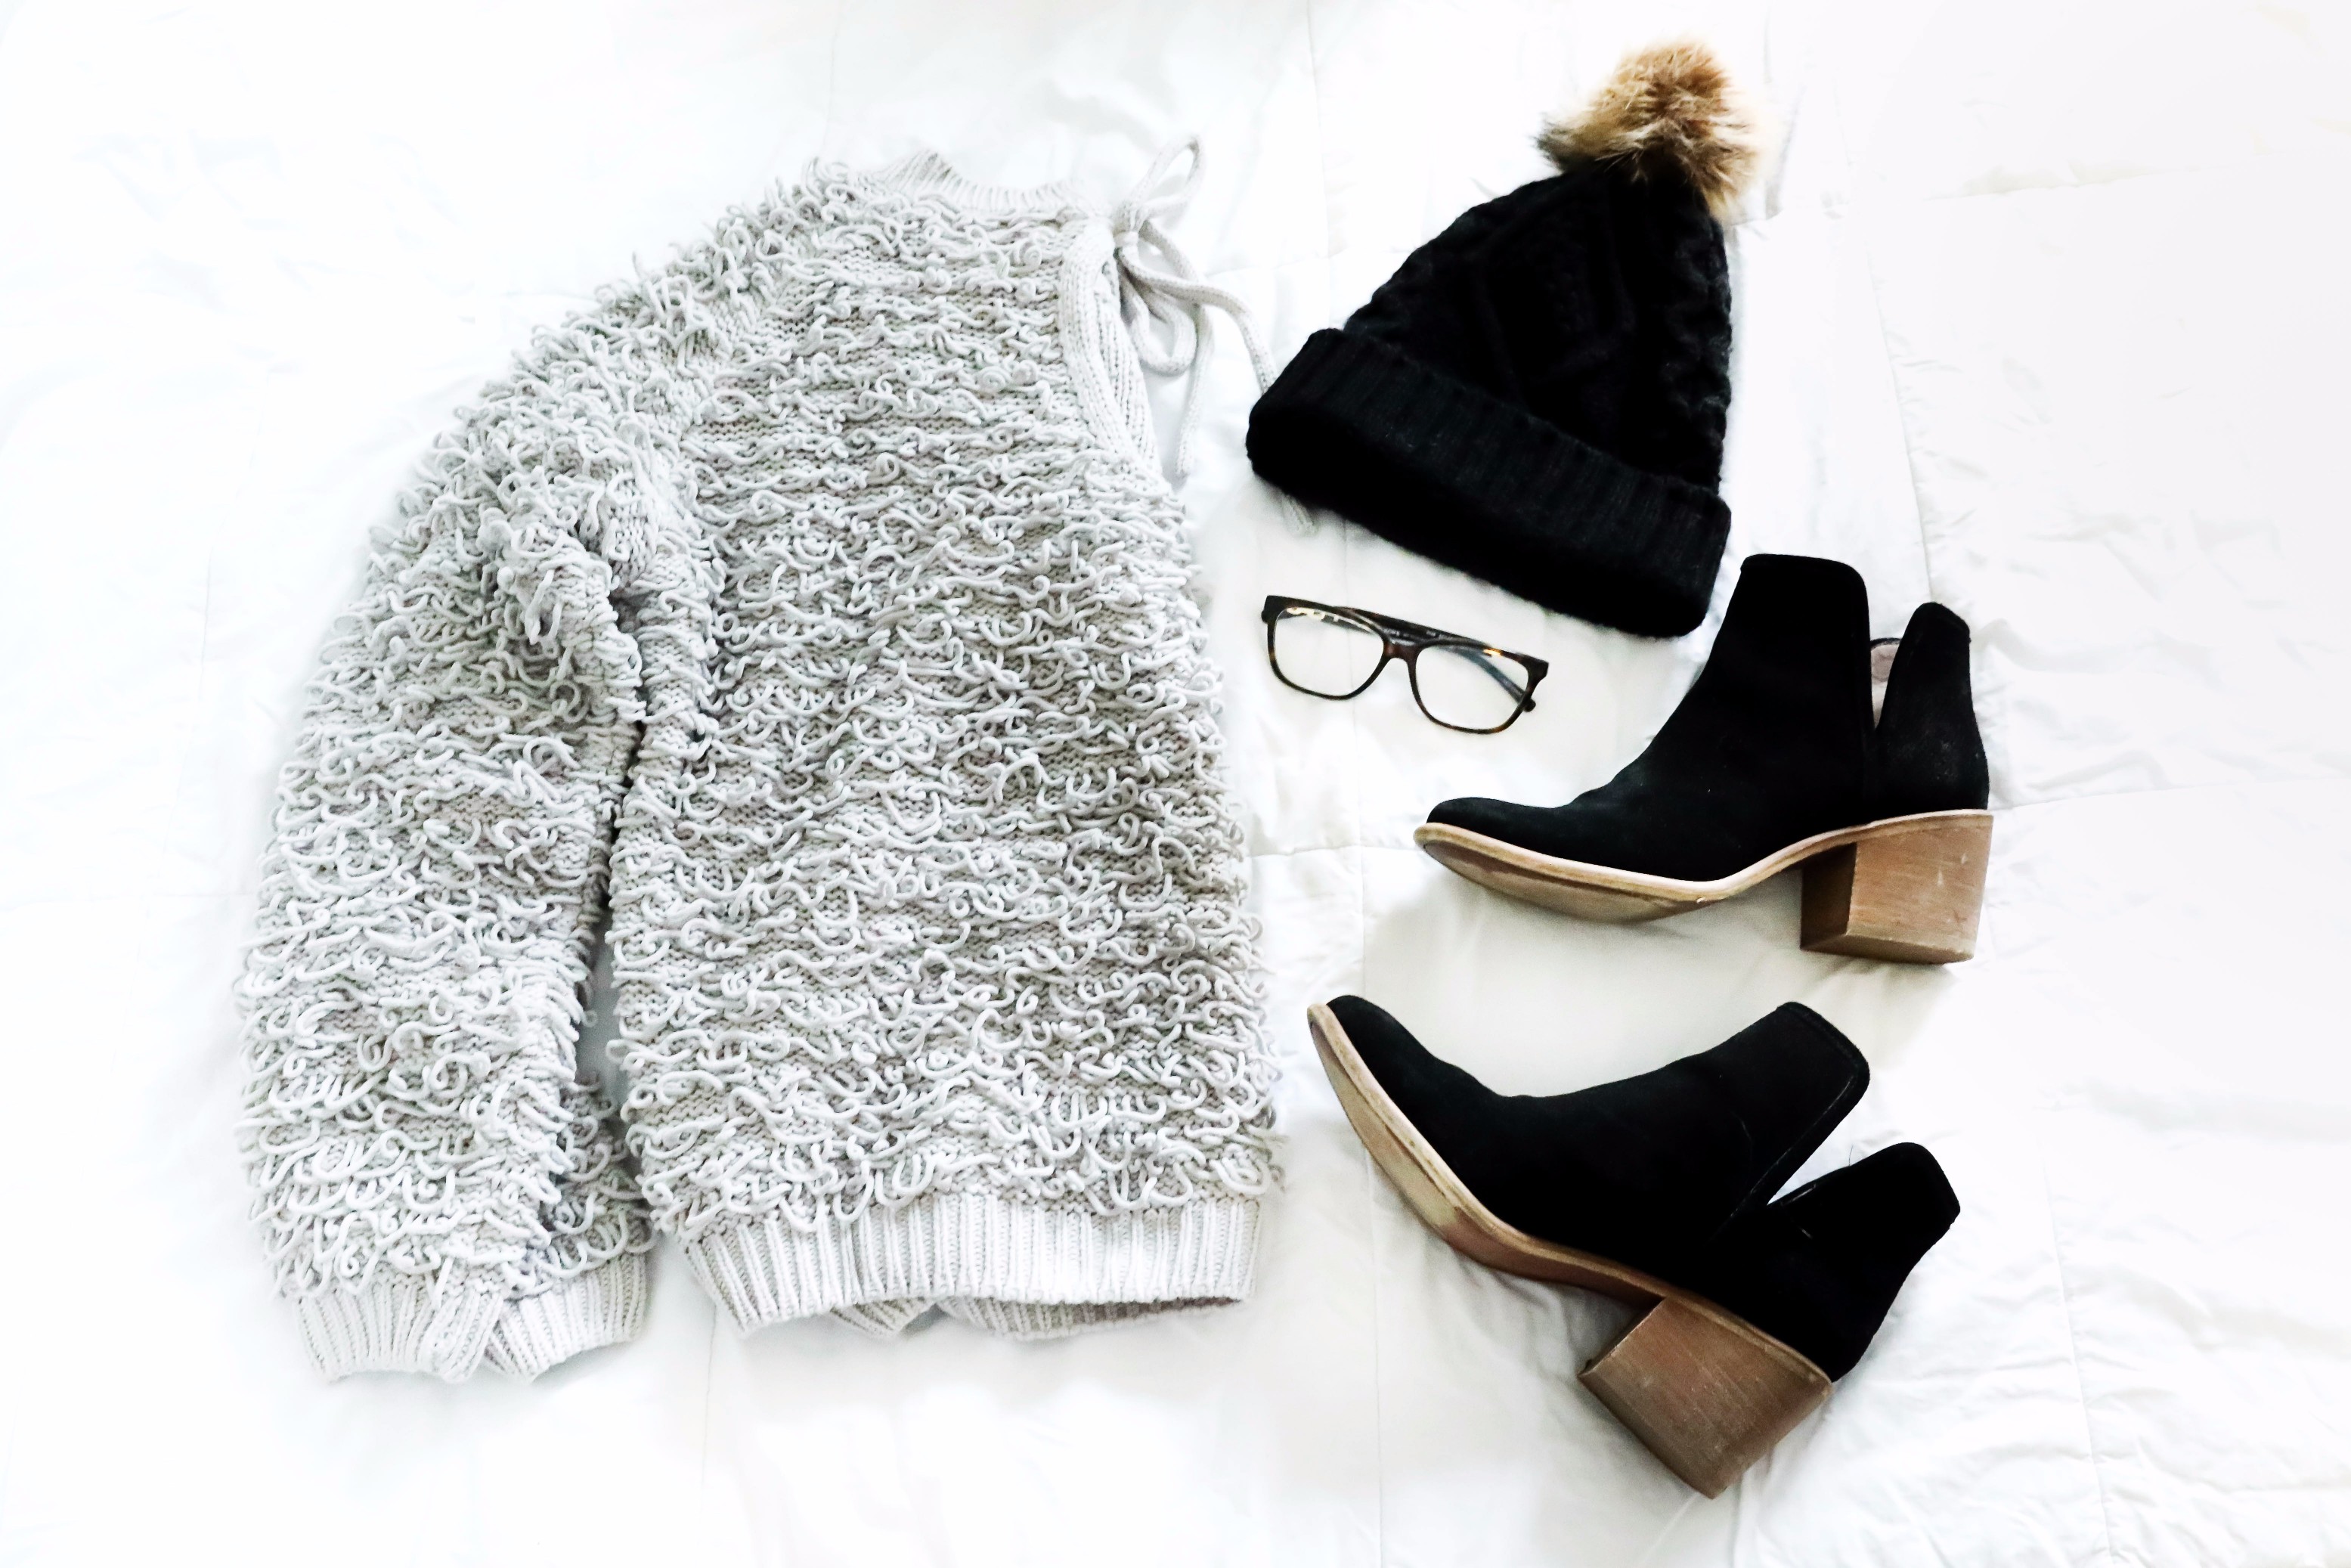 How to look cute in the cold weather with scarves, sweaters, boot socks and more on fashion blog daily dose of charm by lauren Lindmark